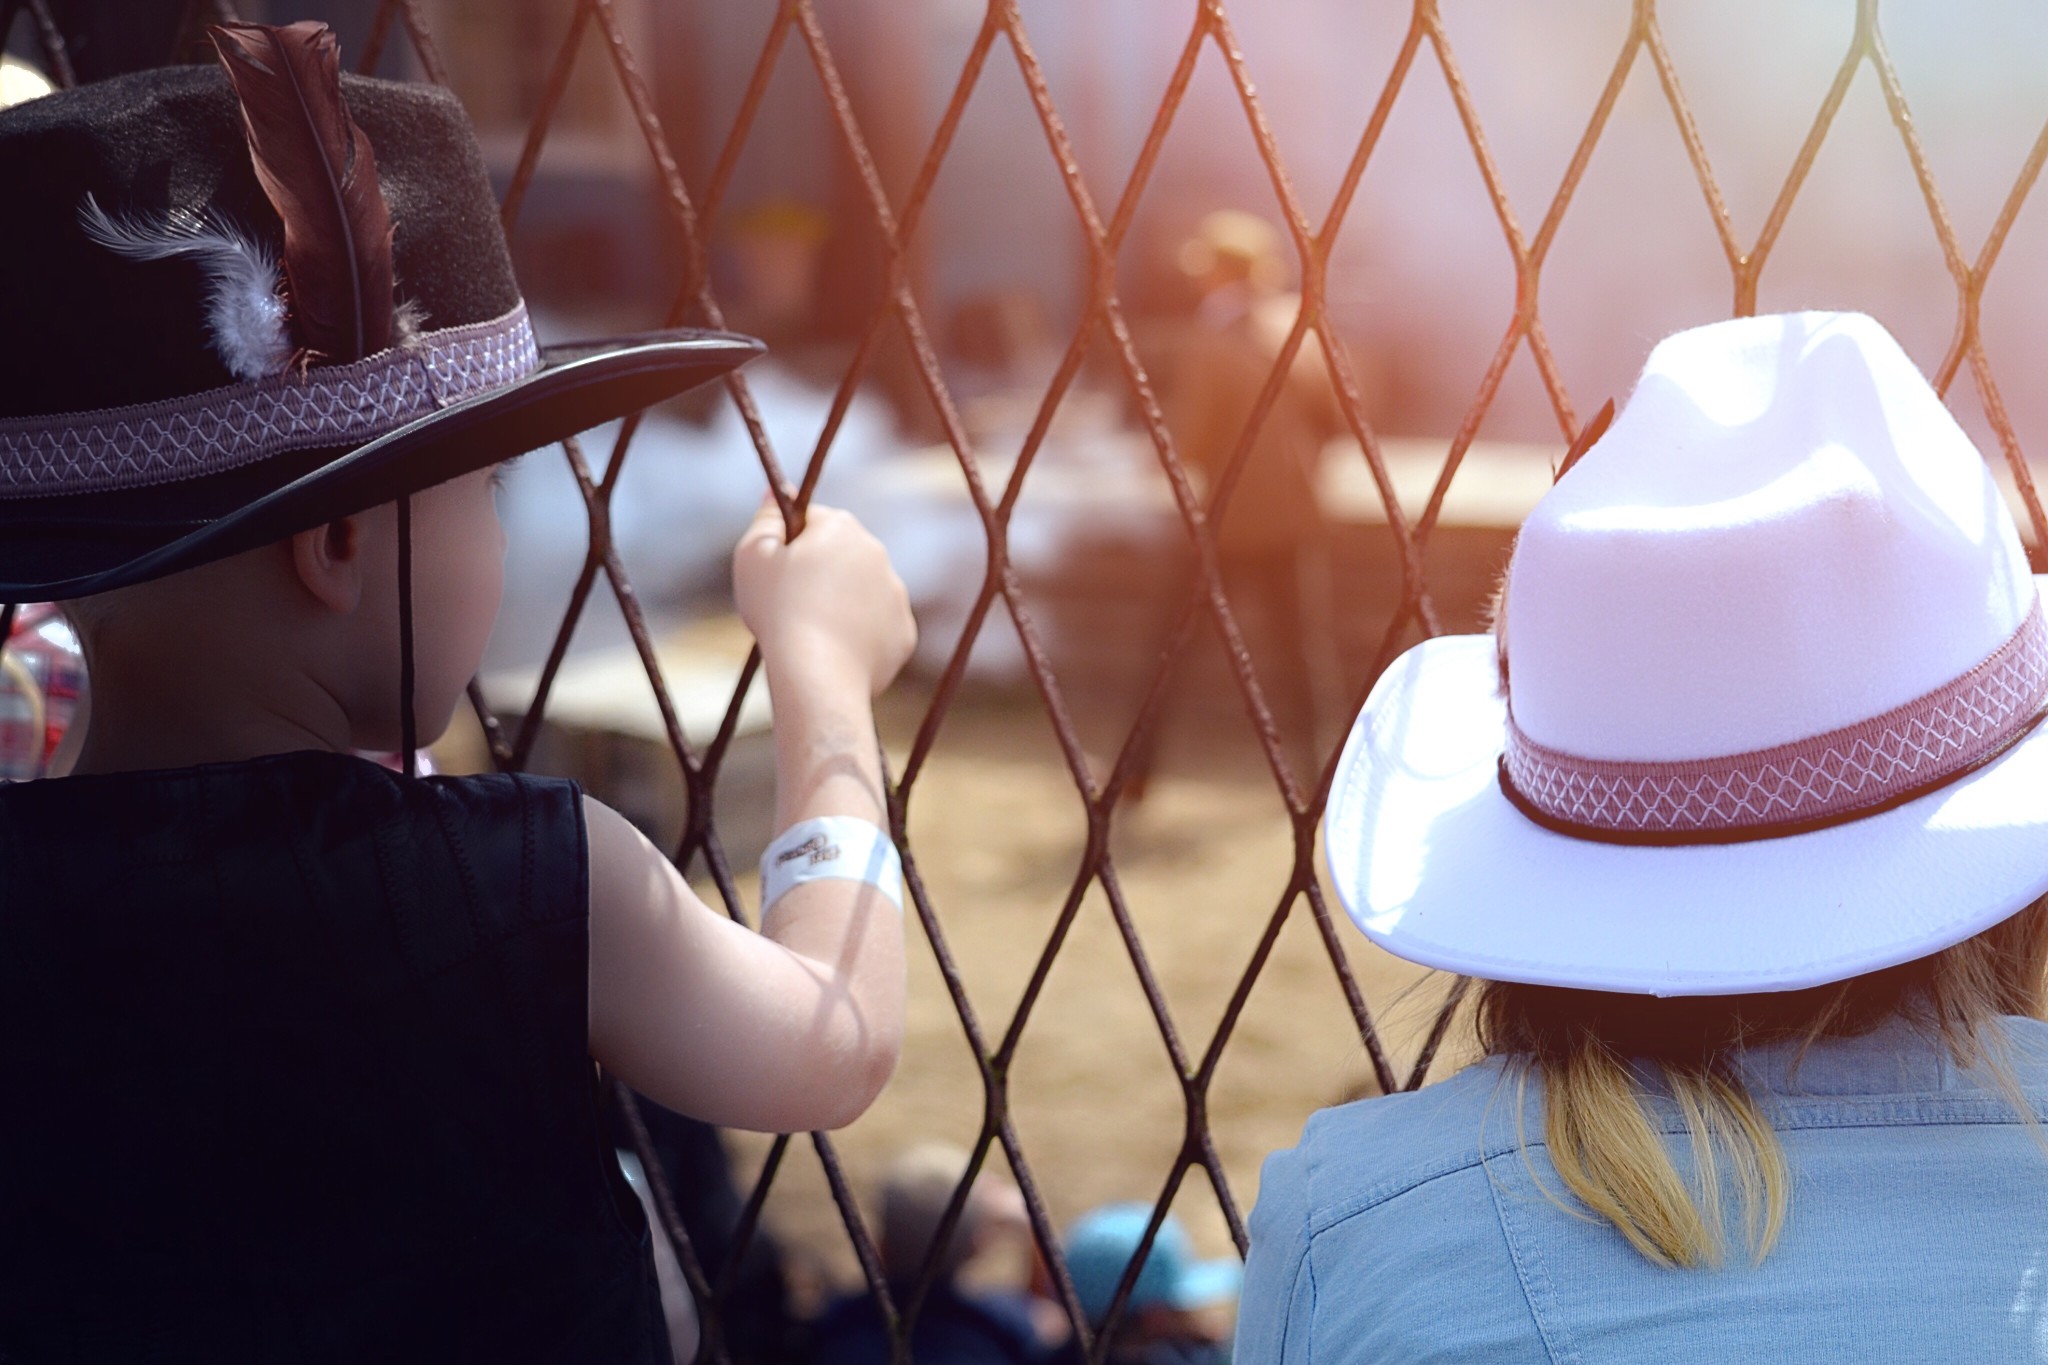 Sartorial style aside, white trumps black hat SEO when it comes to content marketing.